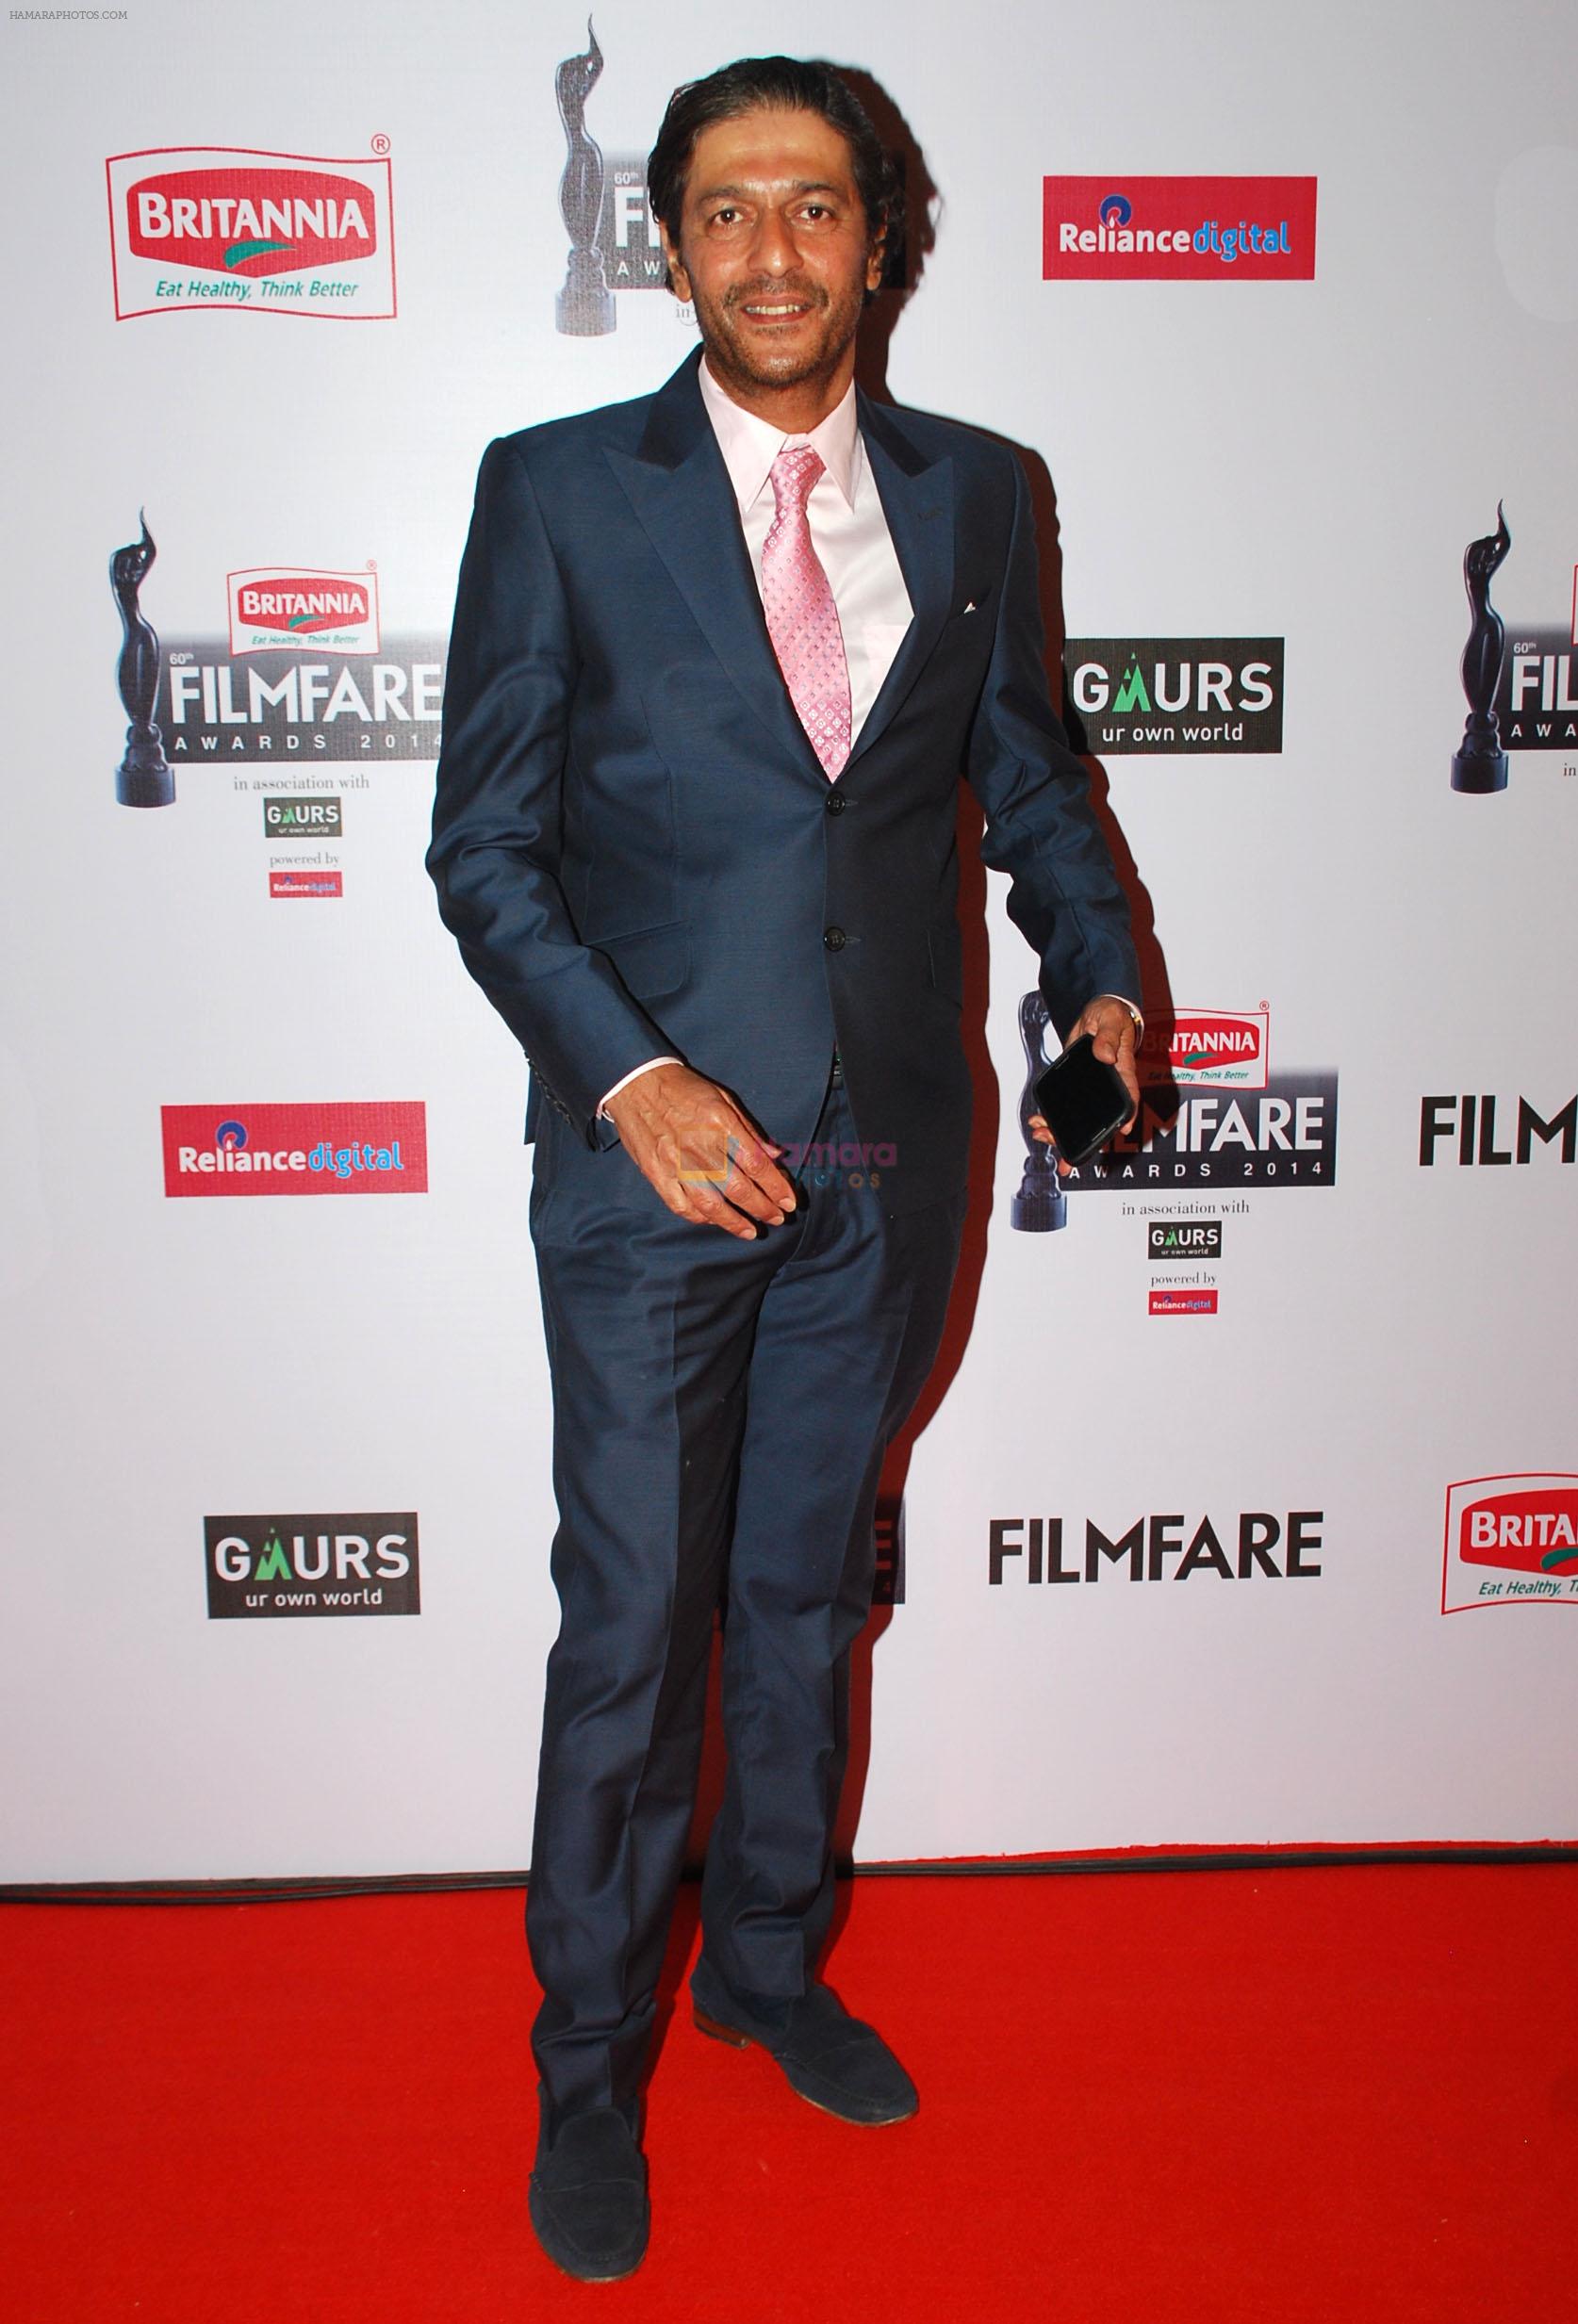 Chunkey Pandey graces the red carpet at the 60th Britannia Filmfare Awards